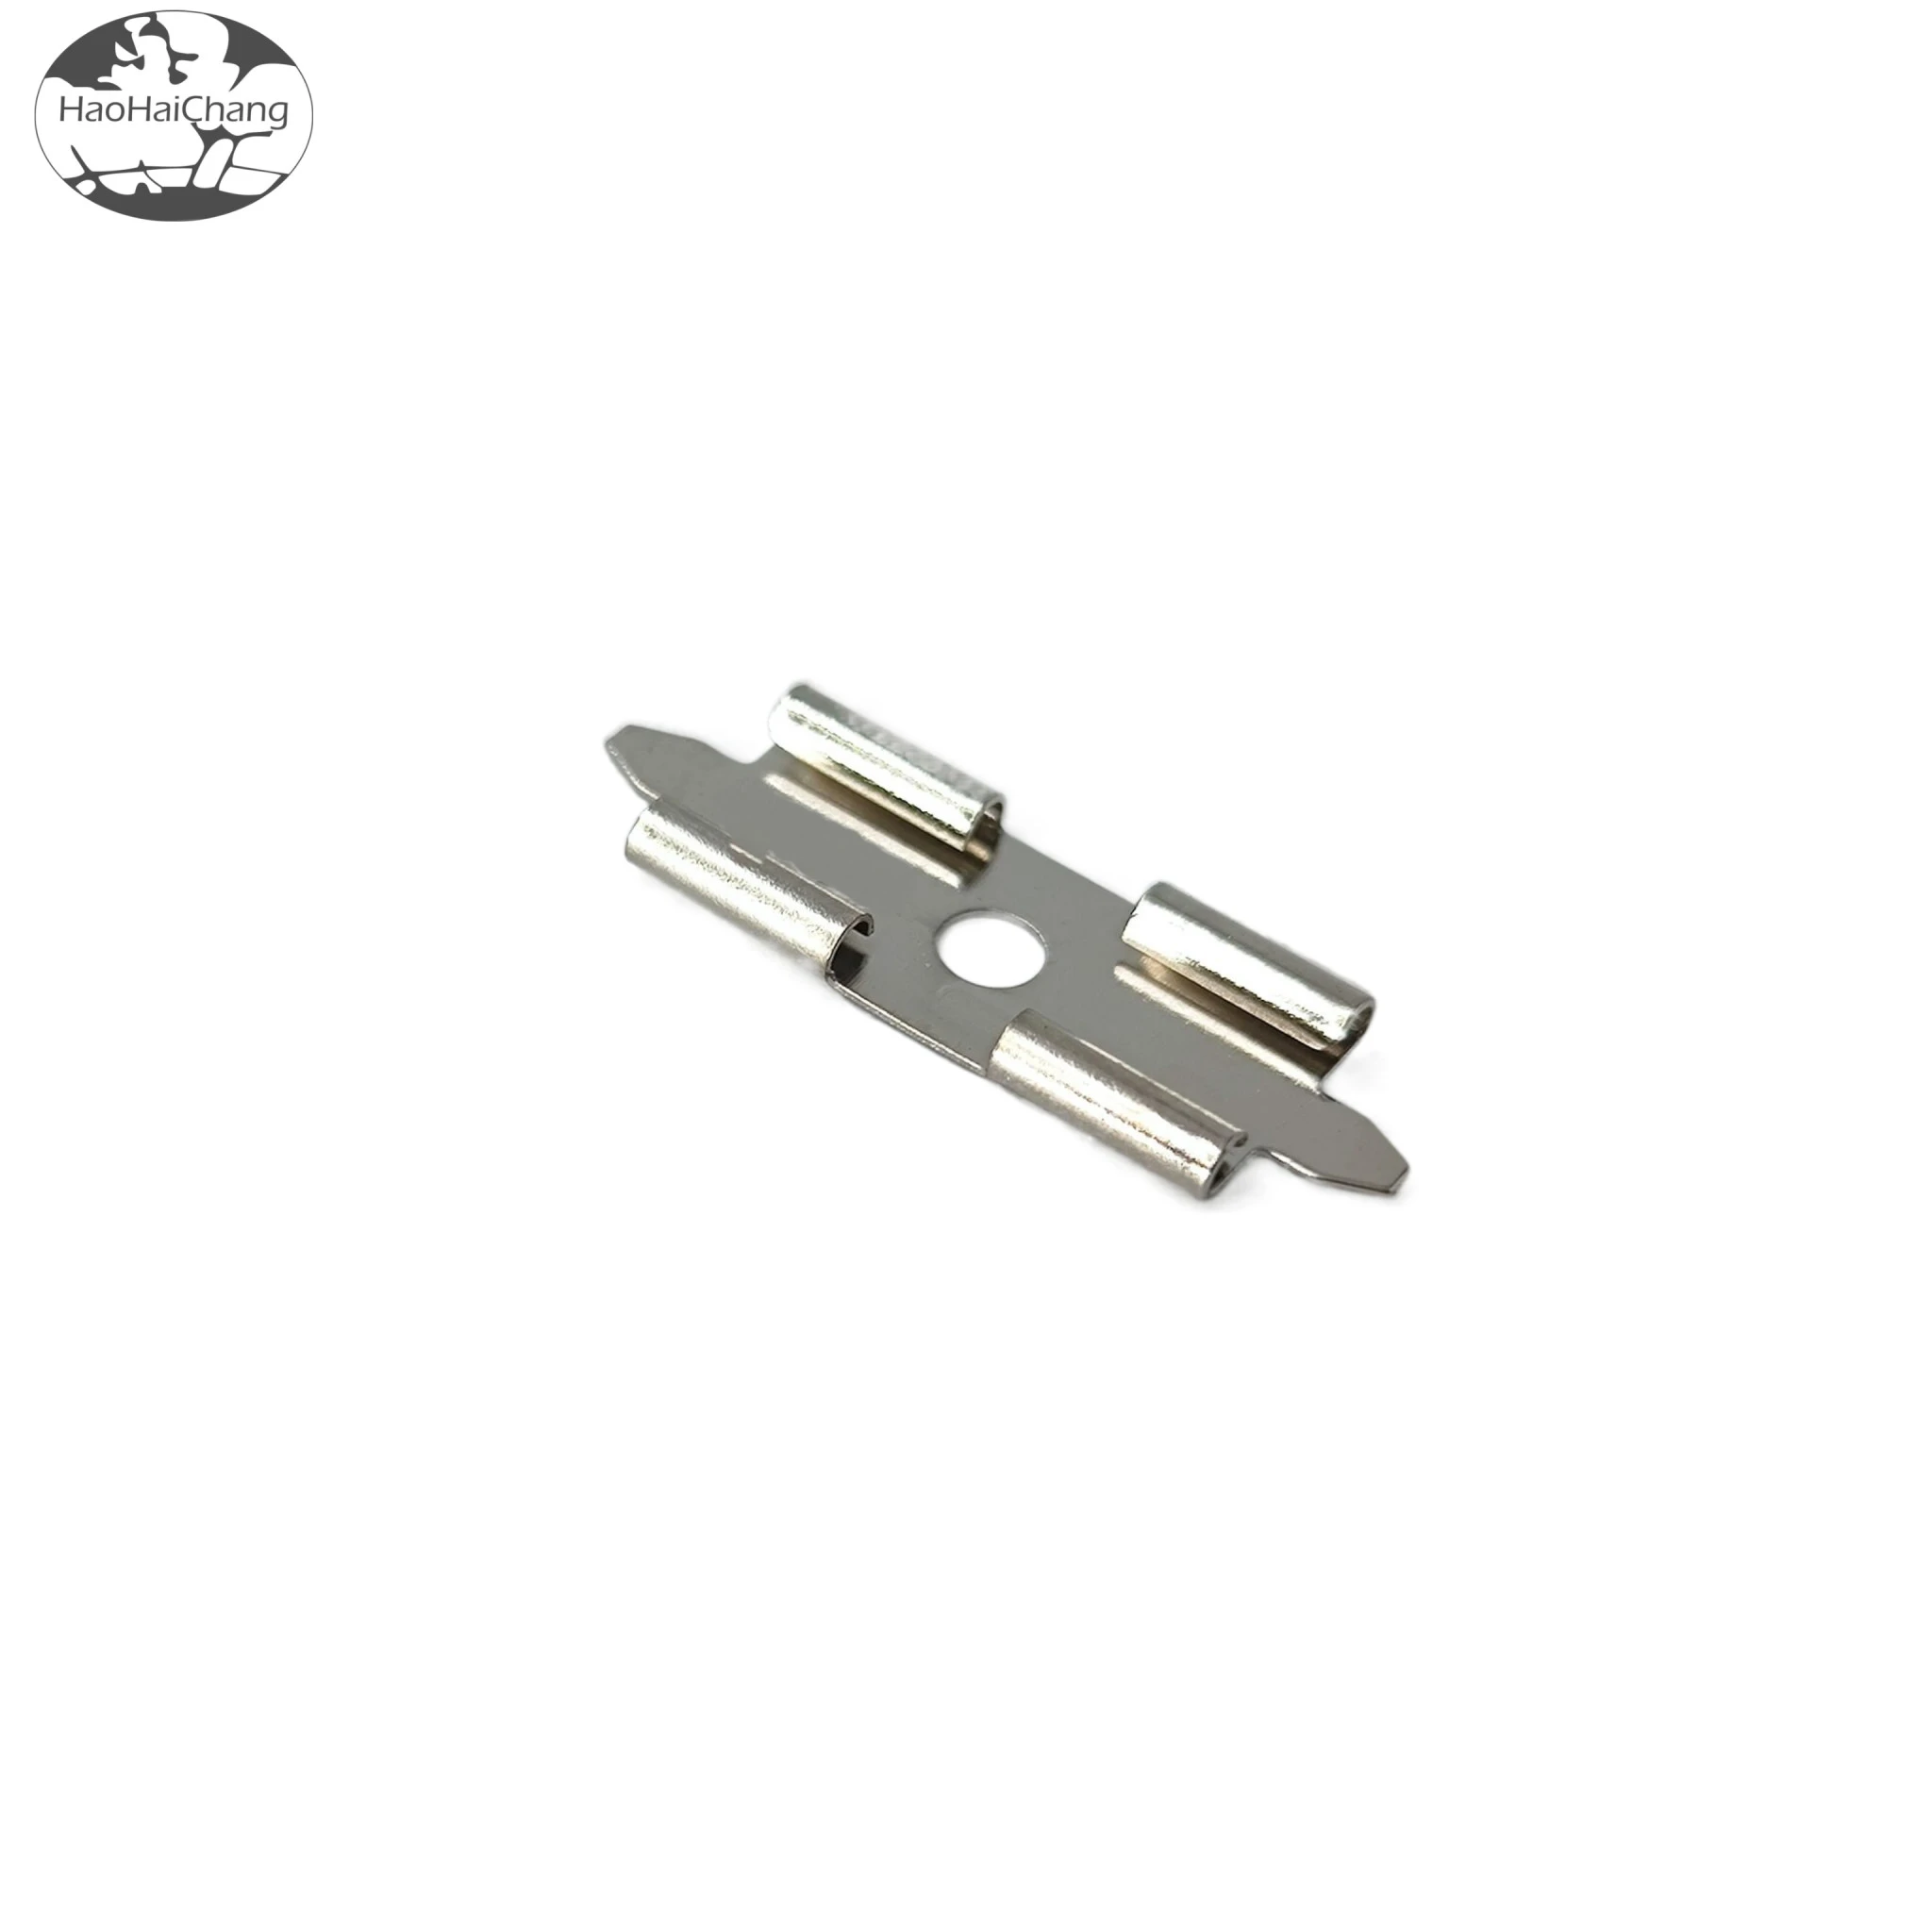 HHC-0127 Connector